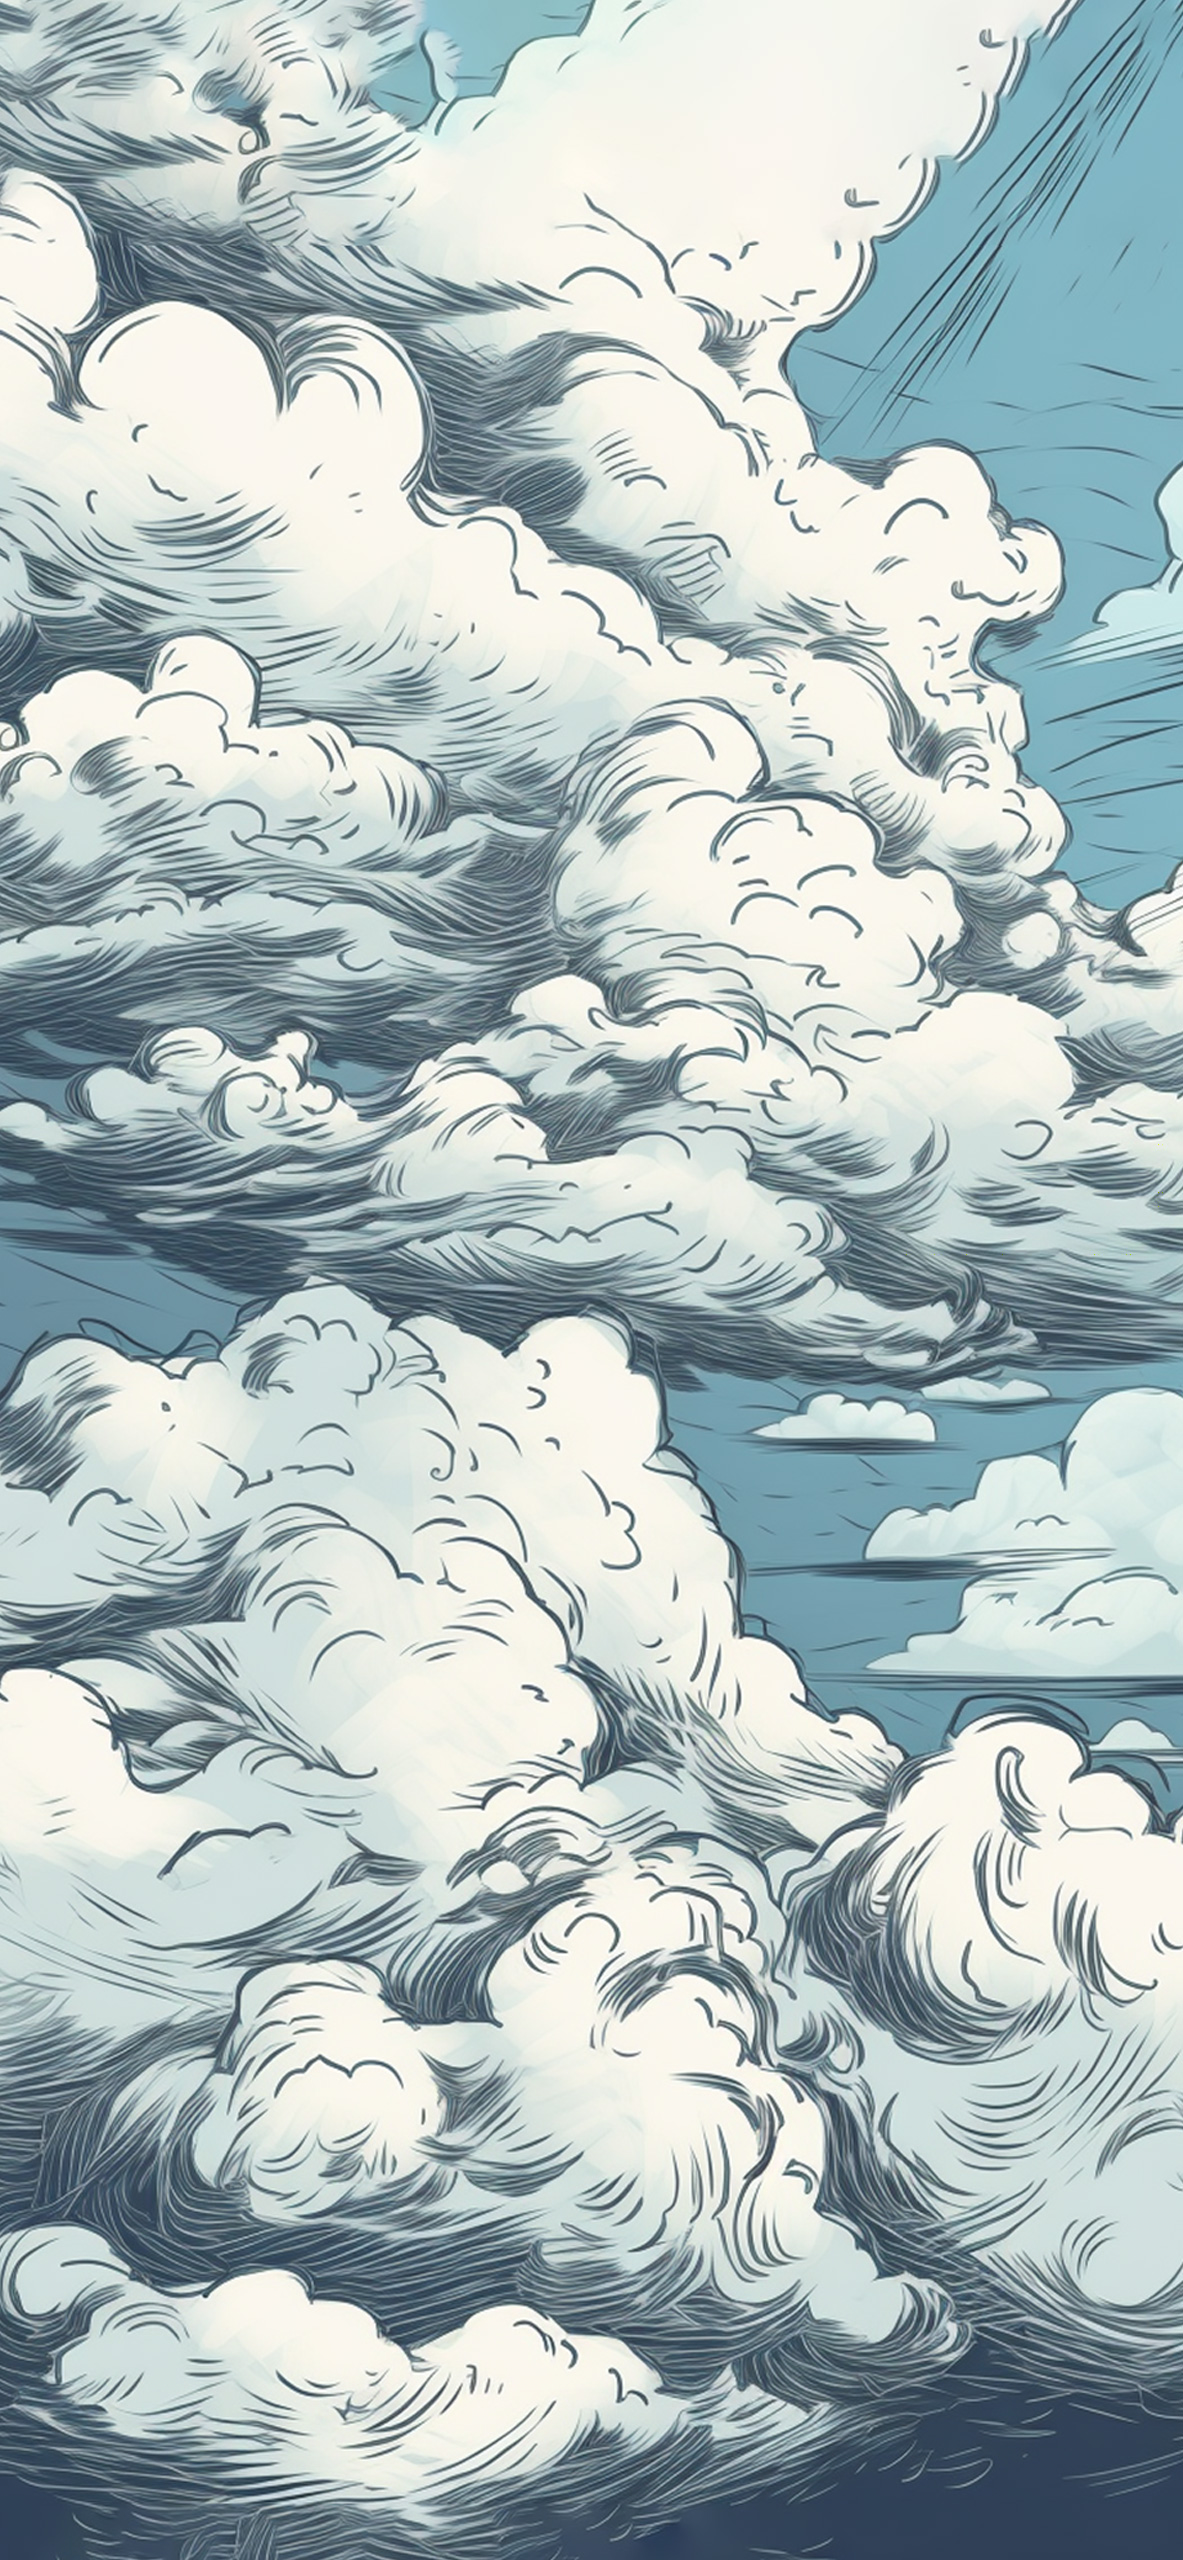 Sketch of Clouds - Painting Mural Wallpaper - Blue – House of Fetch-tuongthan.vn